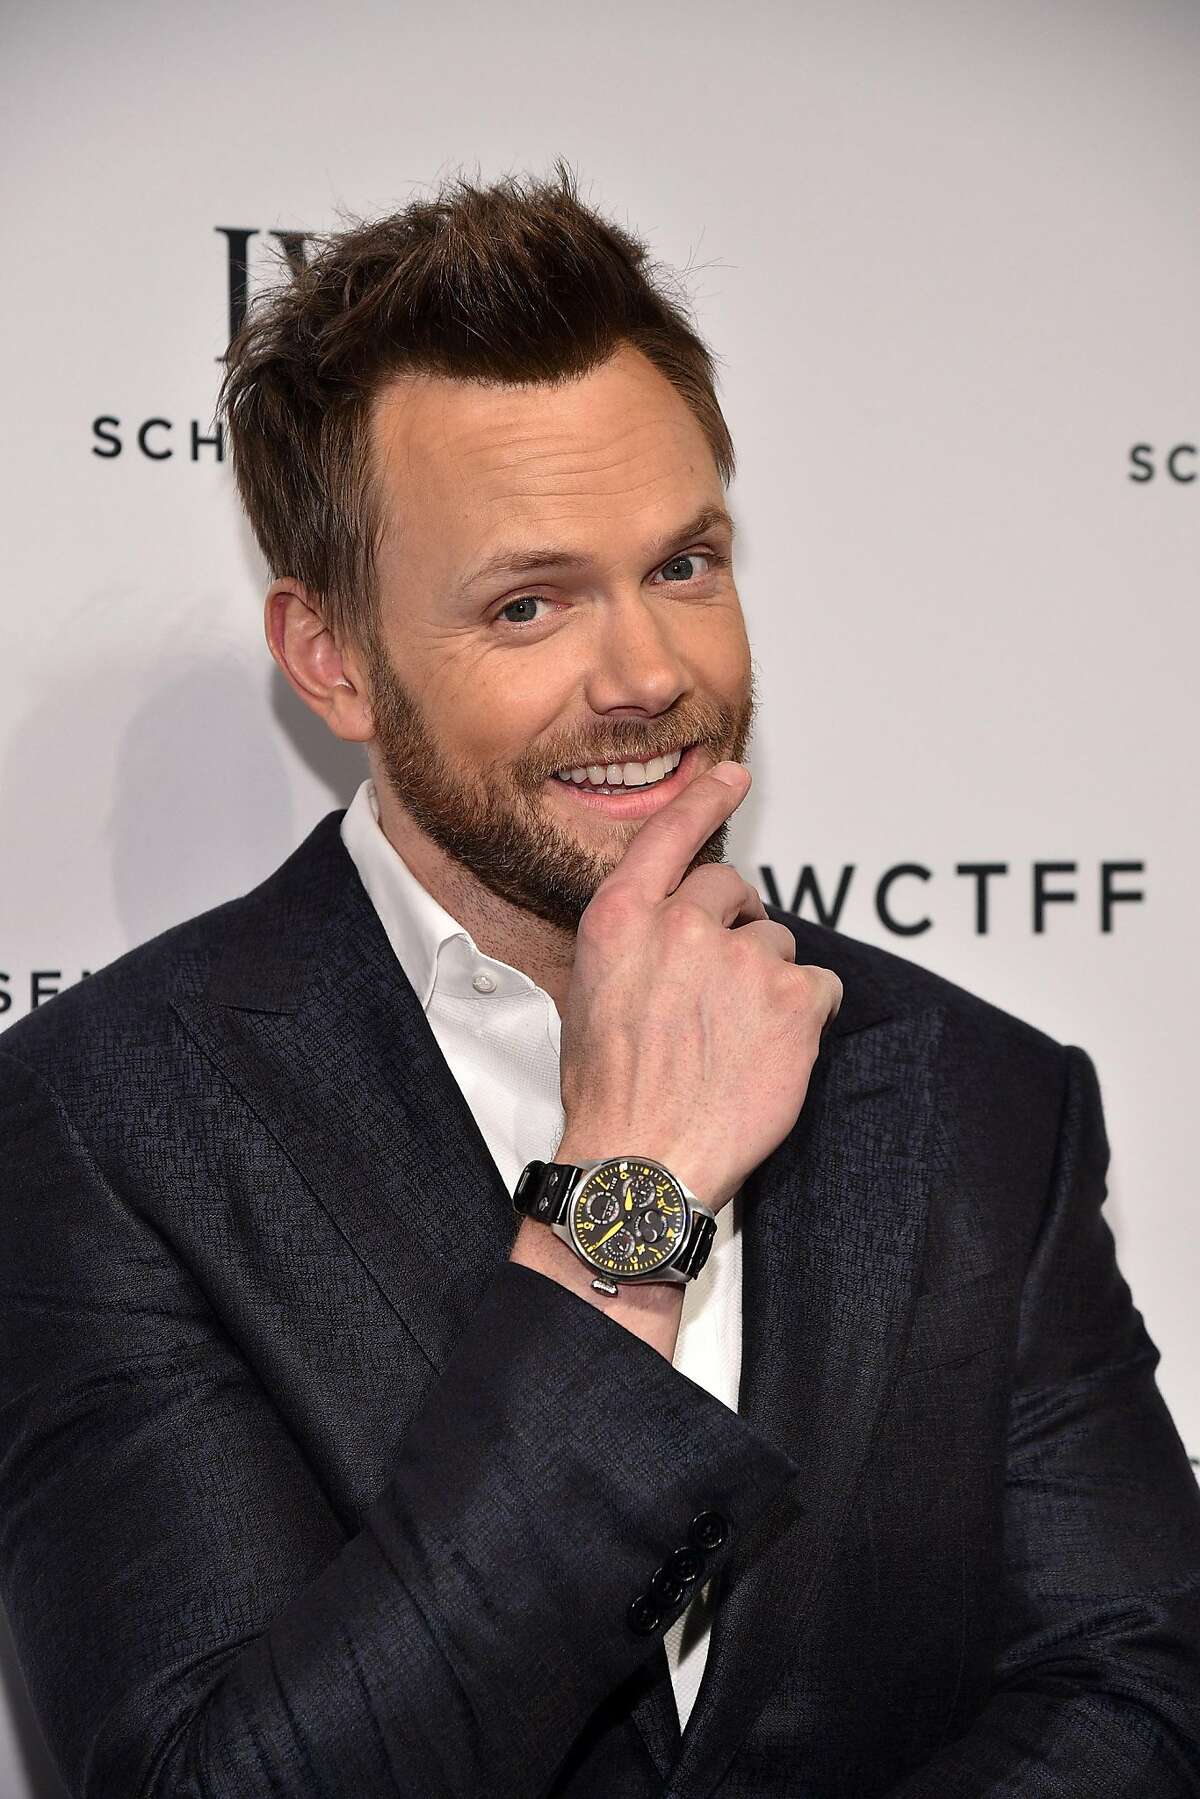 NEW YORK, NY - APRIL 14: Comedian Joel McHale attends the 4th Annual IWC Schaffhausen "For The Love Of Cinema" dinner at Spring Studios on April 14, 2016 in New York City. (Photo by Bryan Bedder/Getty Images)